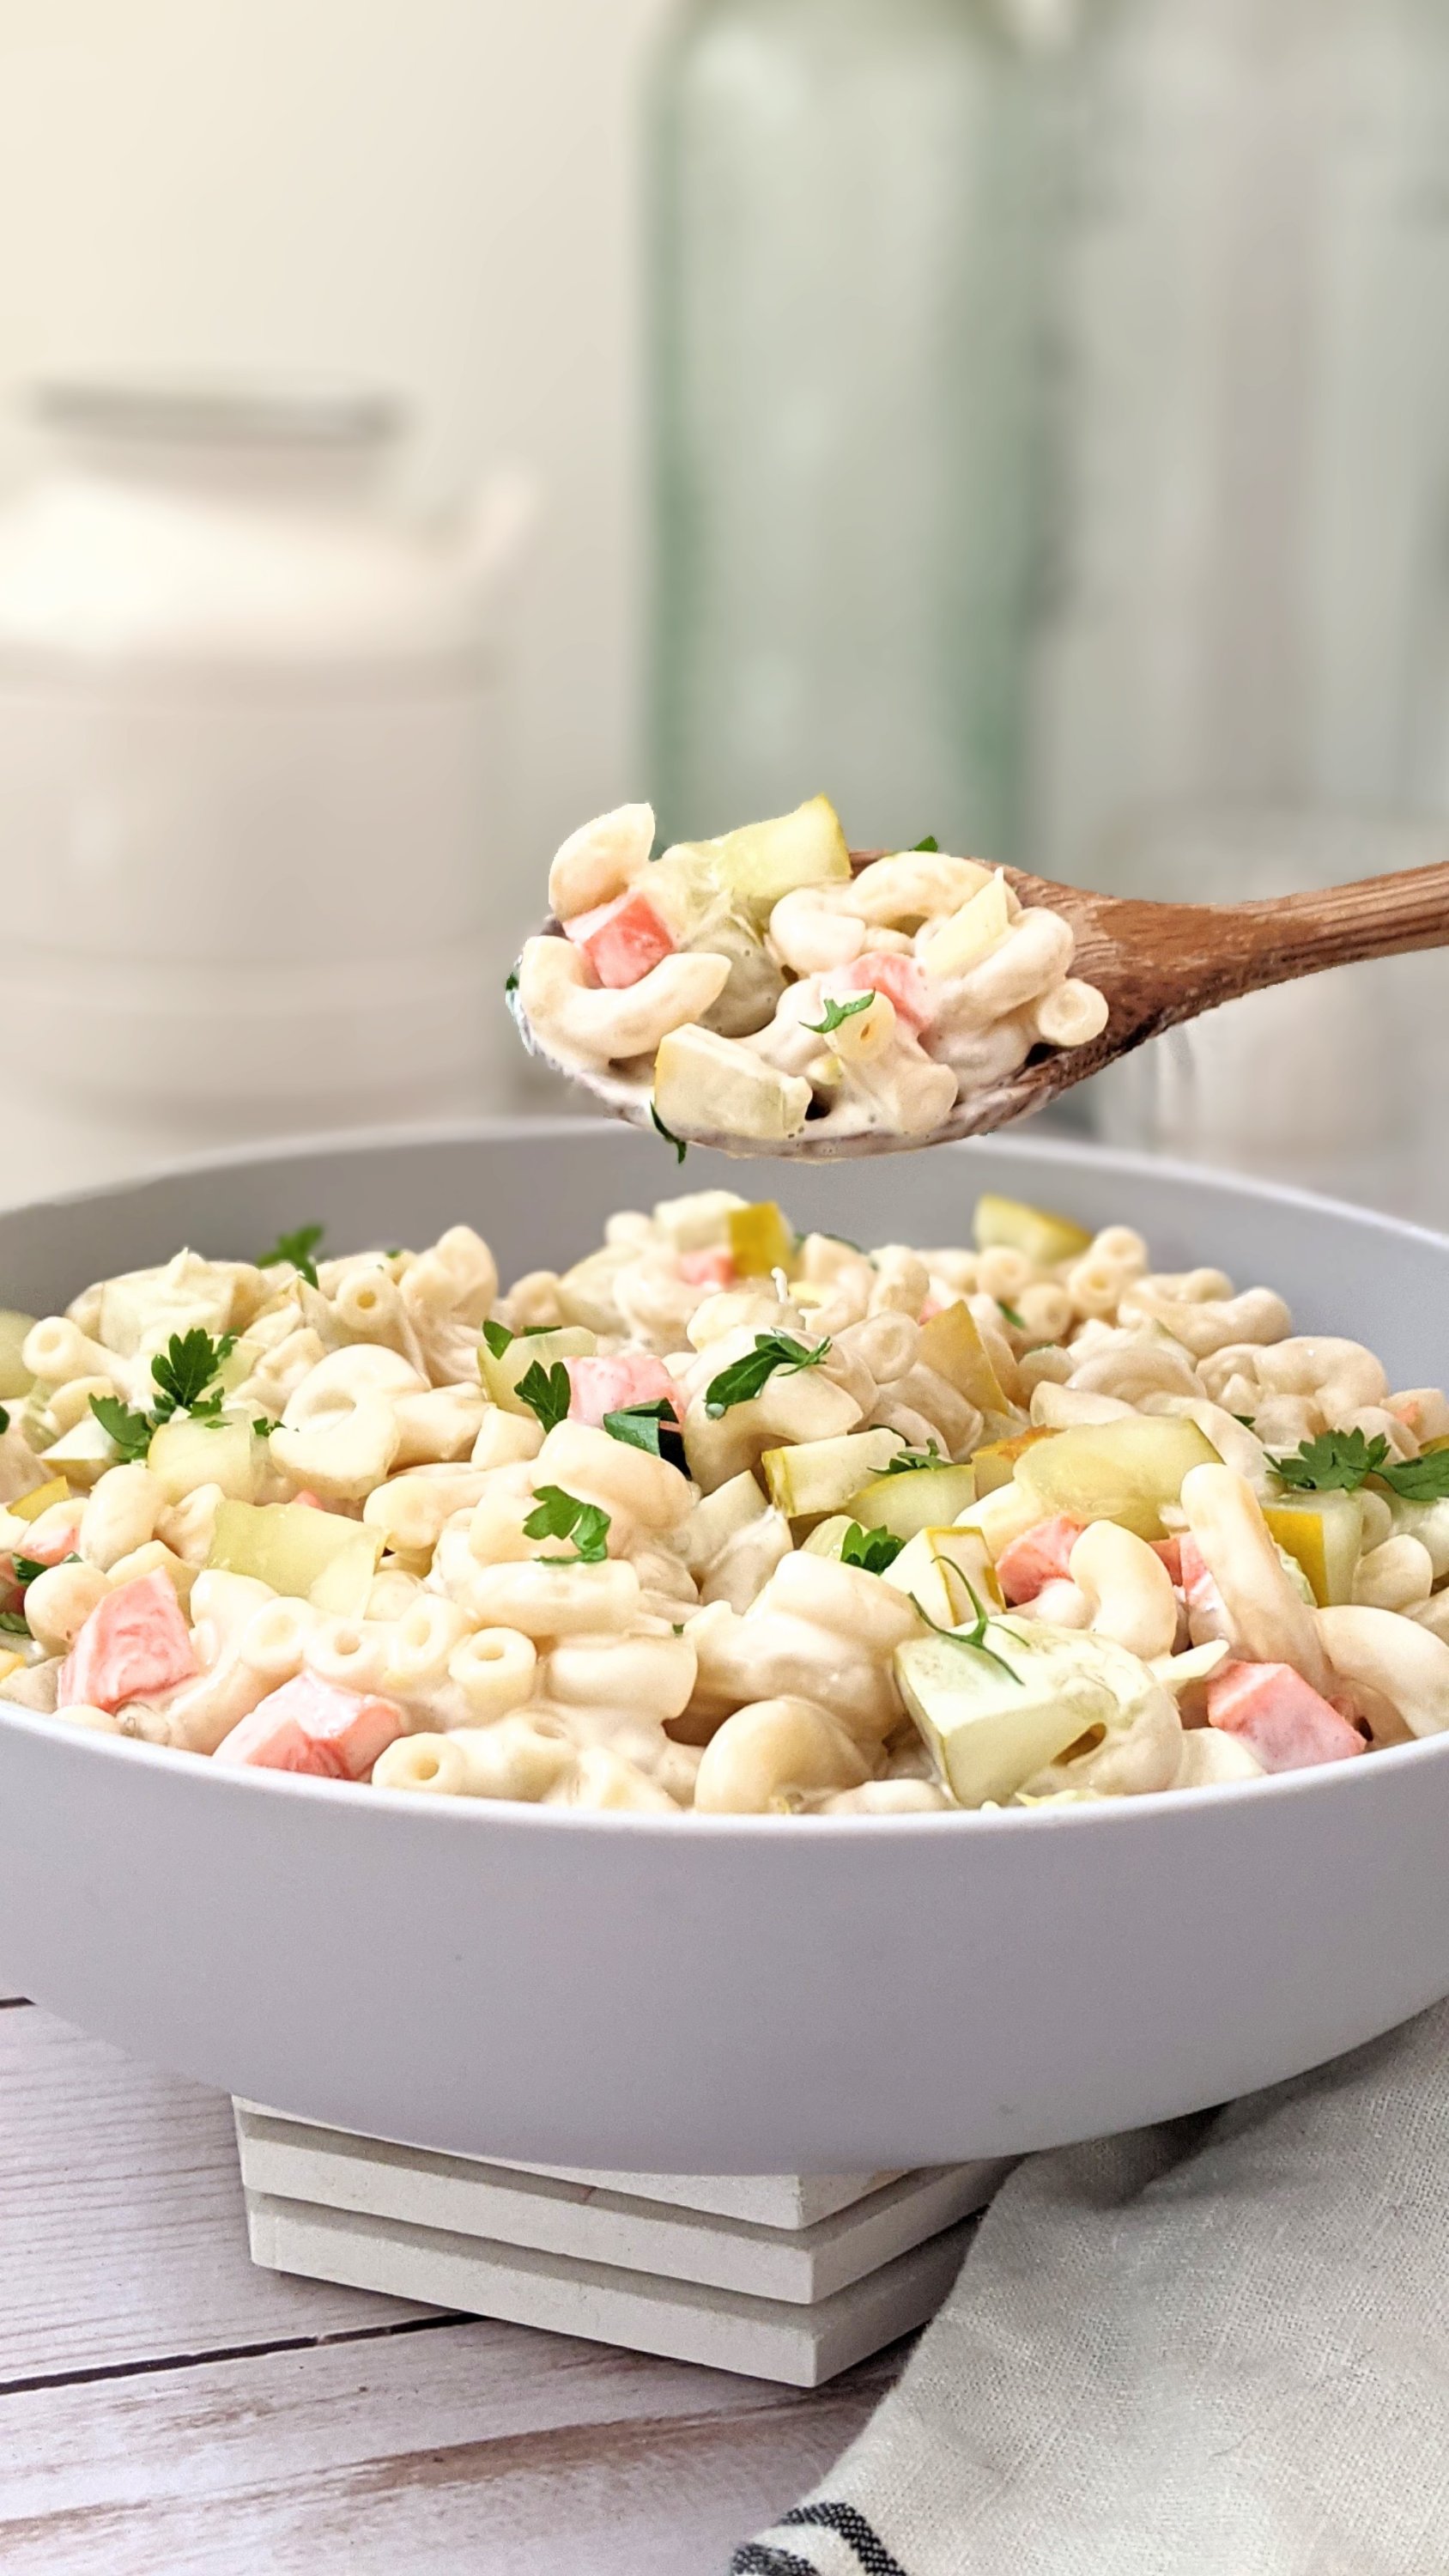 pill pickle macaroni salad recipe vegan gluten free recipes using pickles what can you make with pickles recipes for lunch or dinner plant based